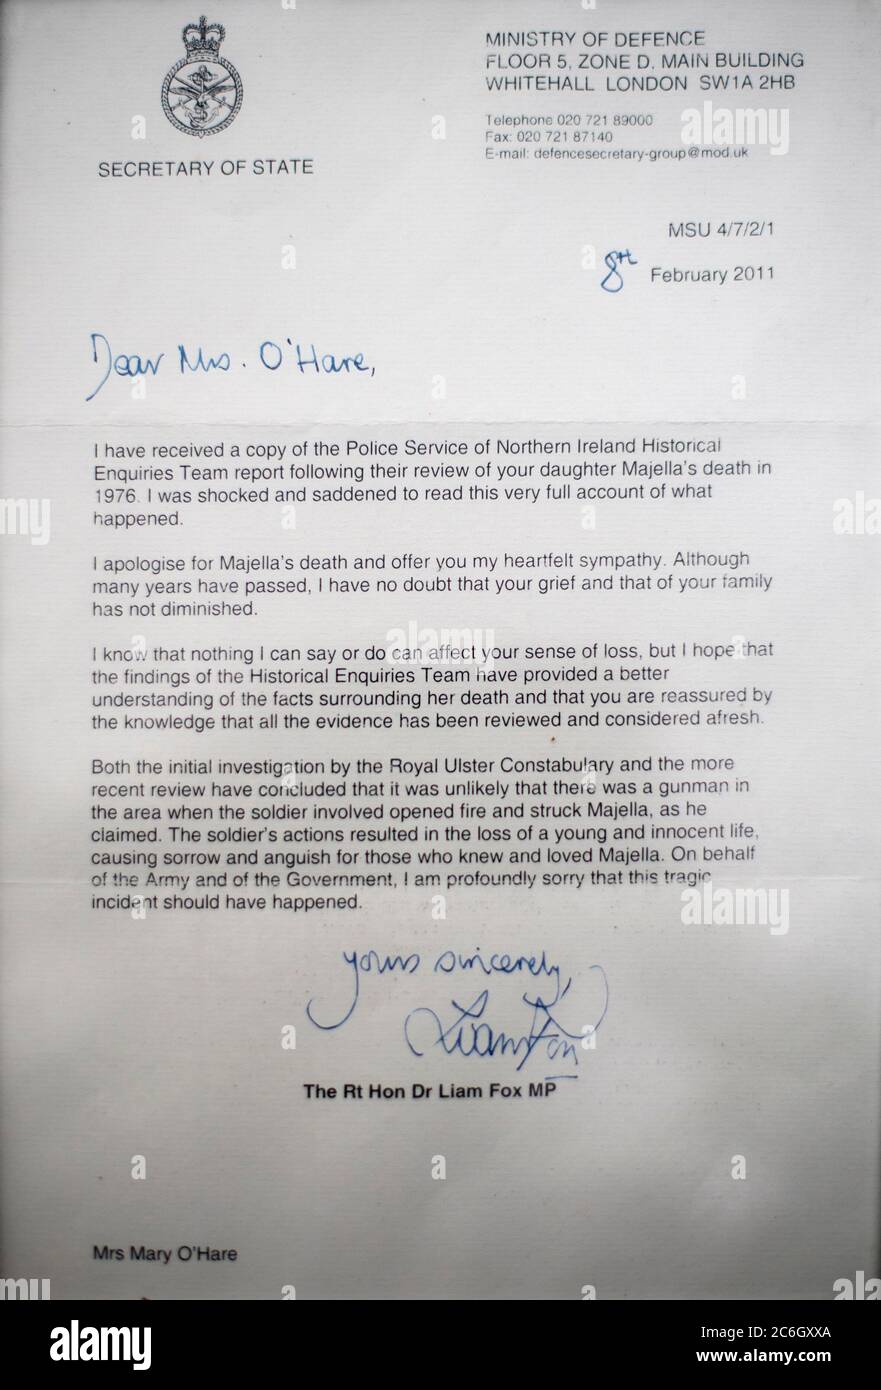 A letter to Mary O'Hare, the mother of Majella O'Hare who was shot dead by the Army in Co Armagh 44 years ago, from the Ministry of Defence in 2011. Her brother Michael O'Hare has vowed to fight for justice for his sister who, at 12 years old, was shot in the back whilst walking to church in Whitecross, Co Armagh on August 14 1976, and has called for an independent investigation into her death. Stock Photo